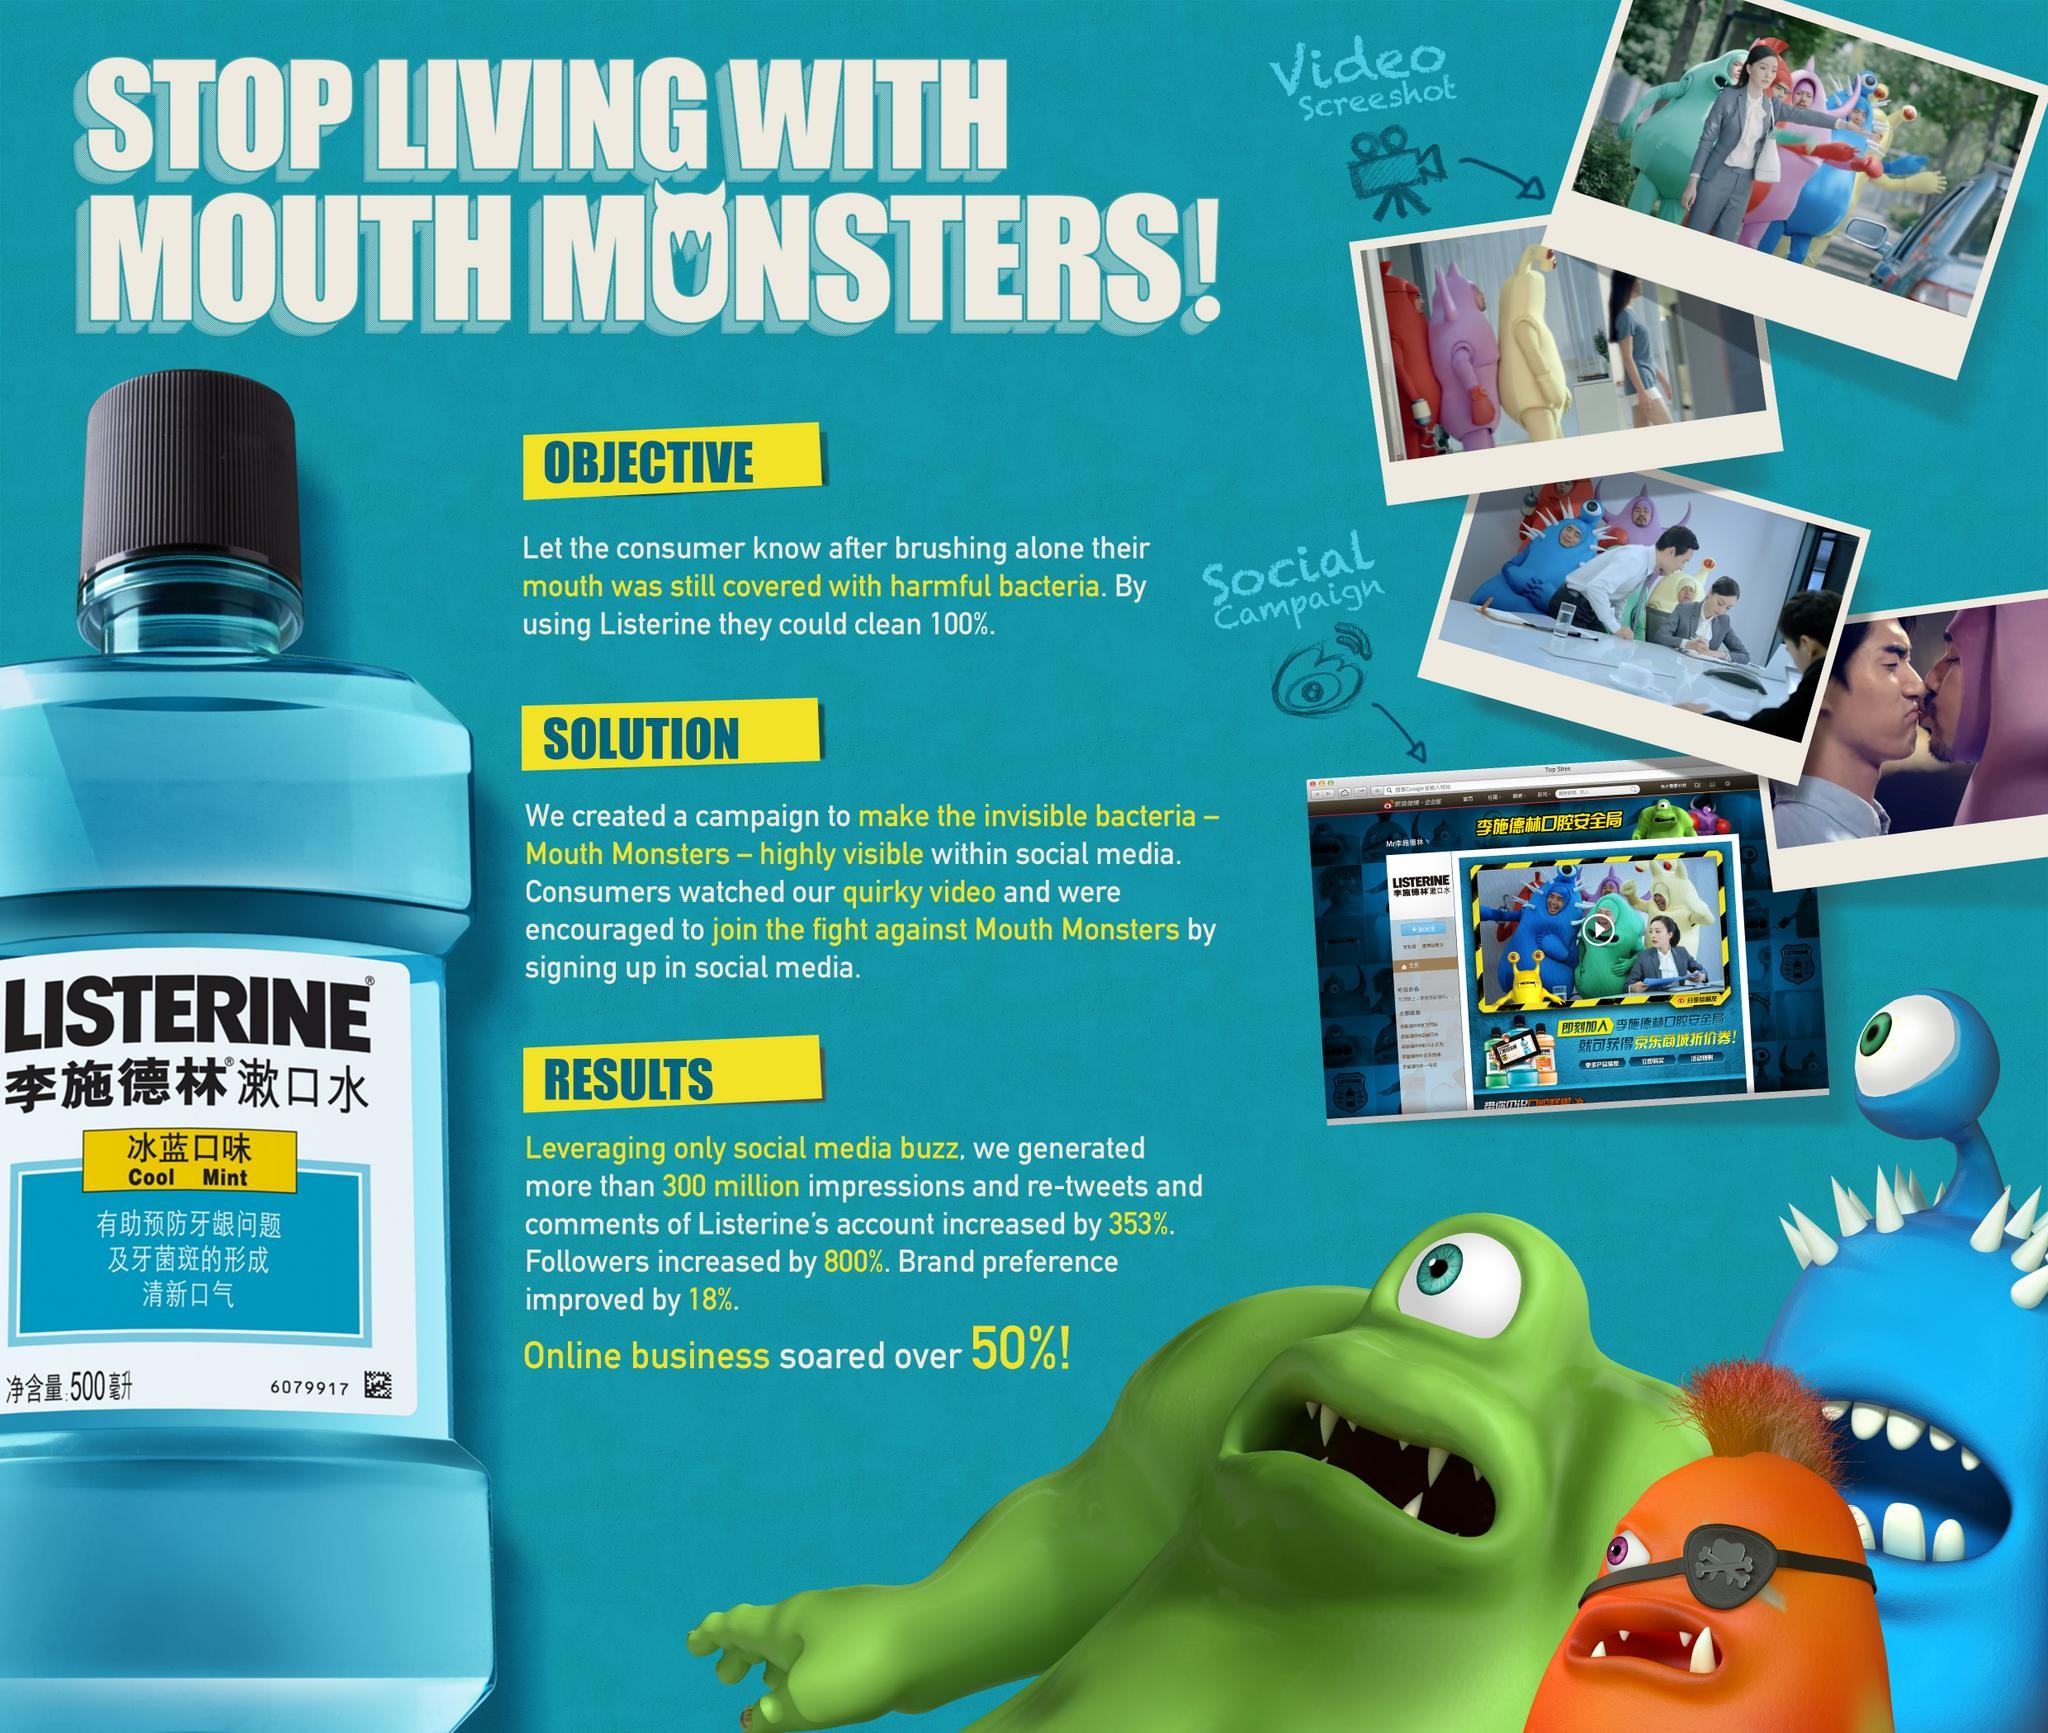 LISTERINE-STOP LIVING MOUTH MONSTERS!